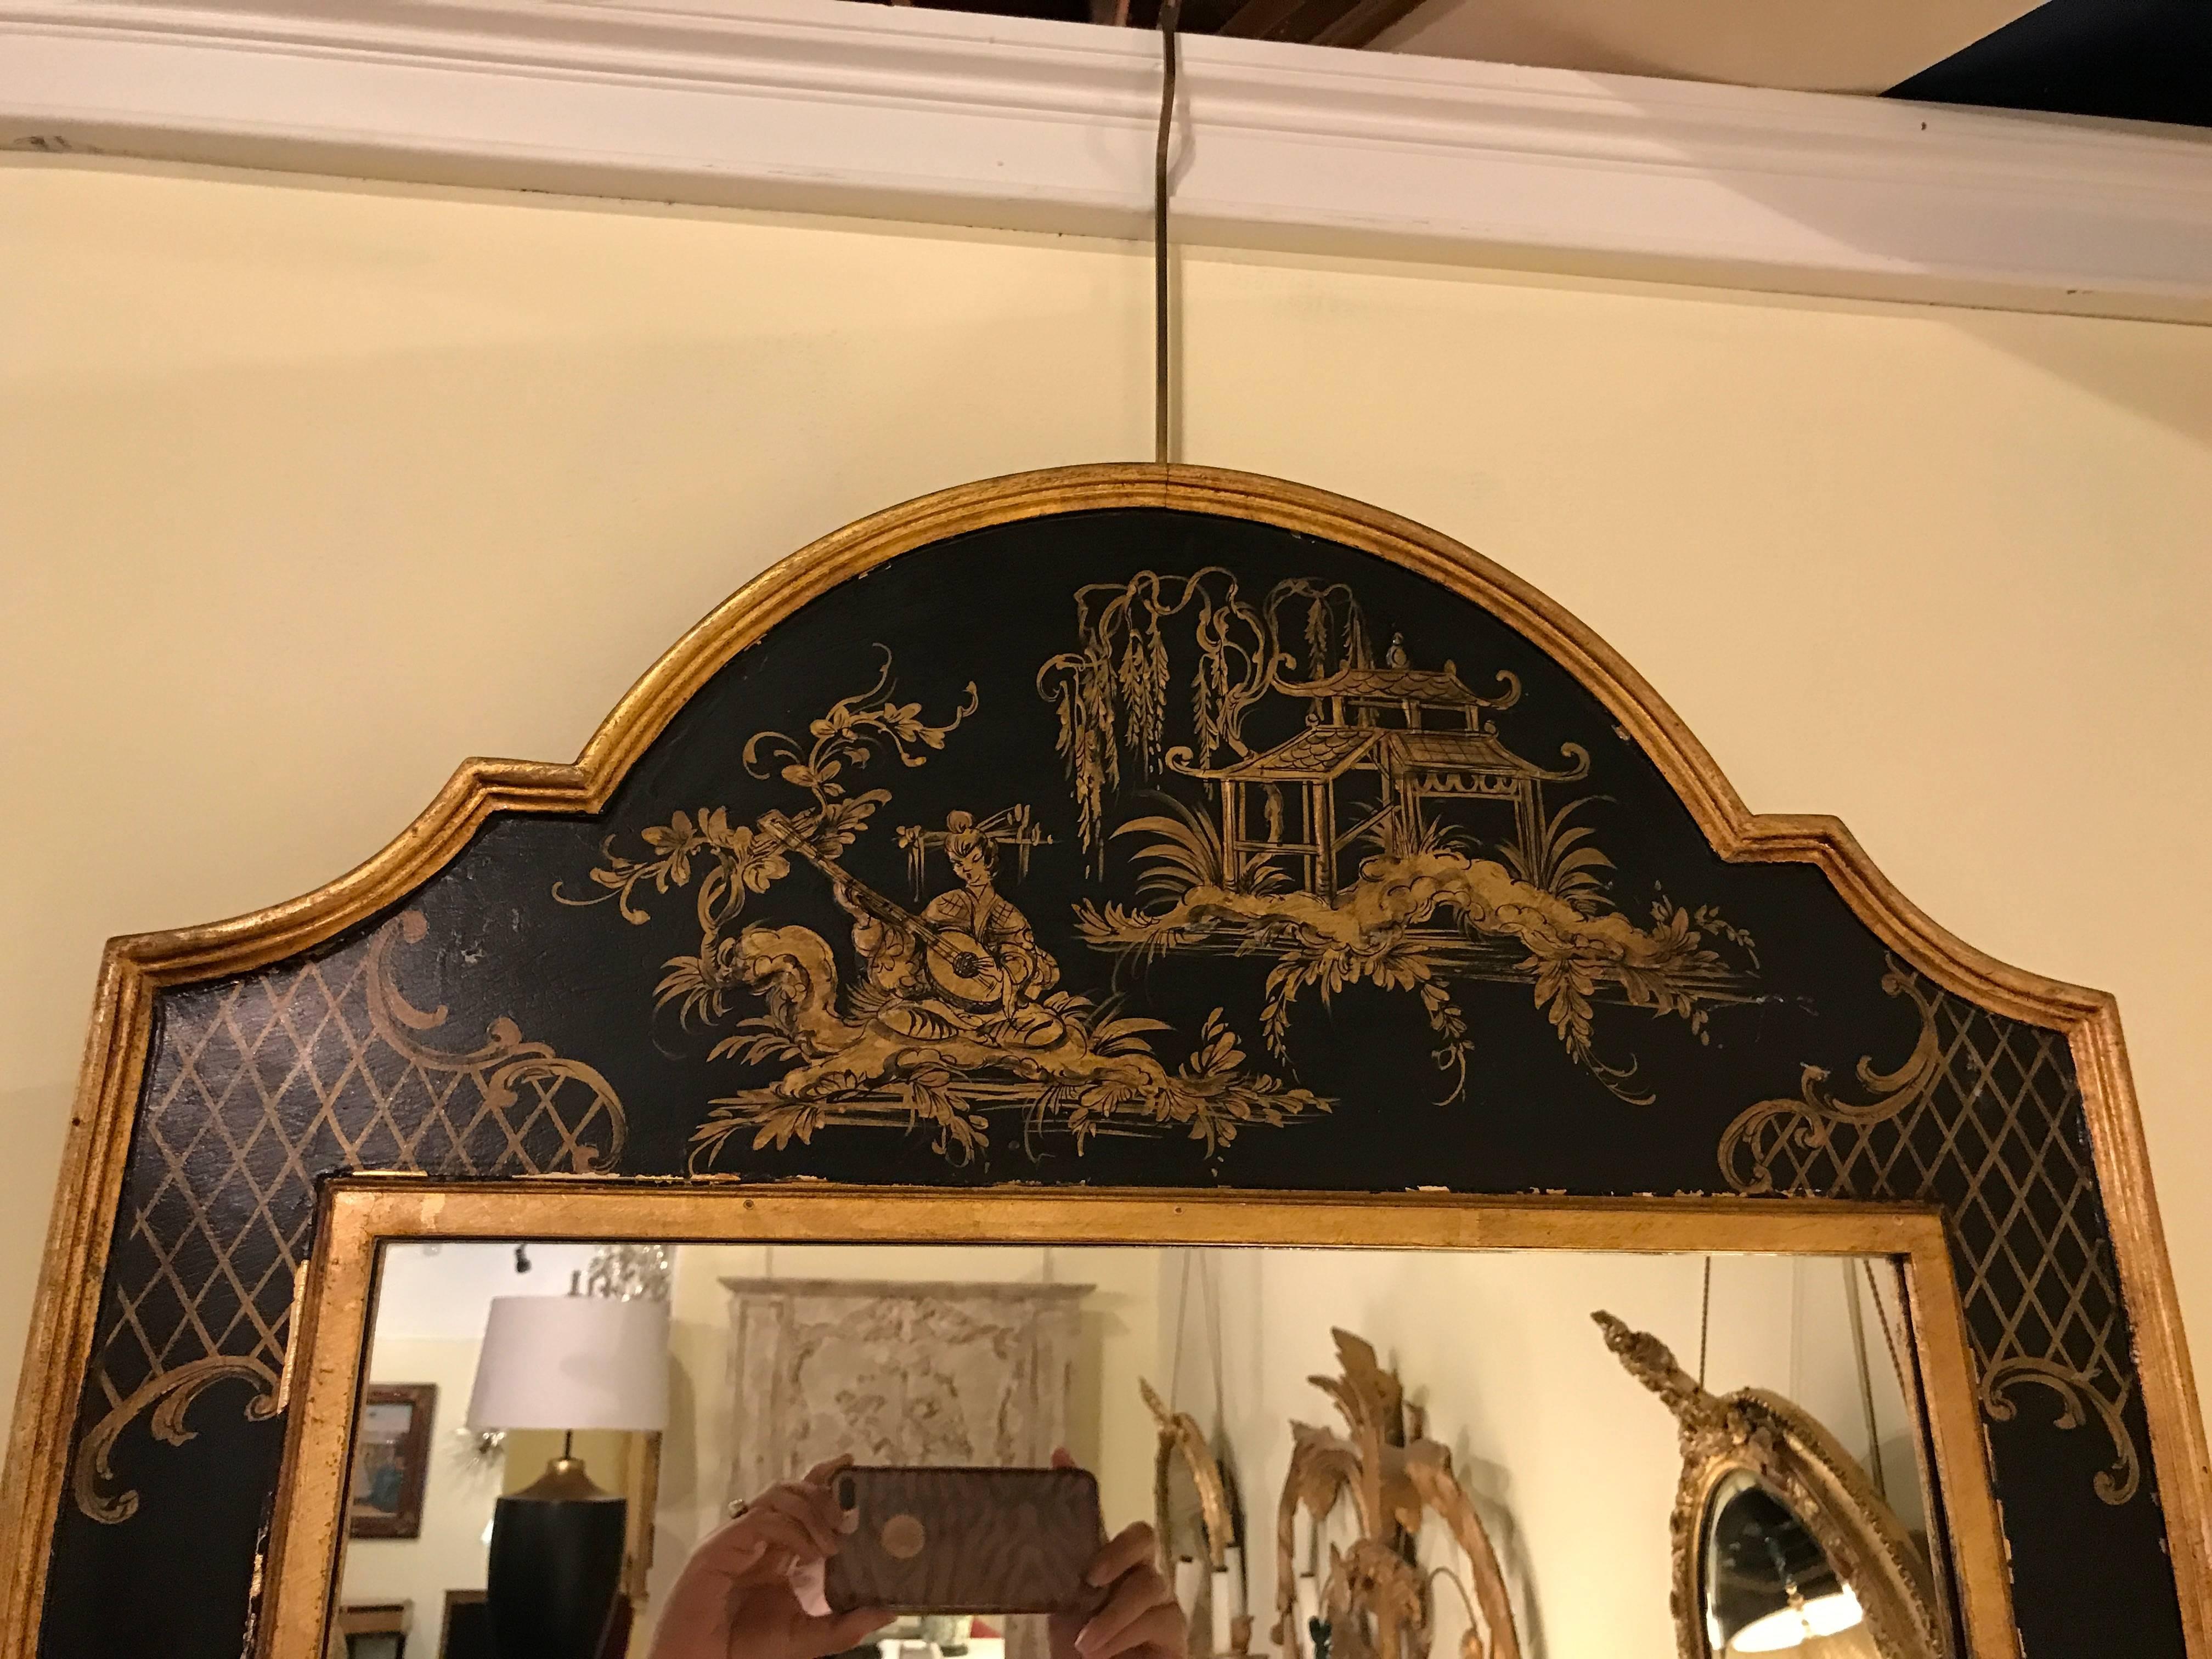 Chinese Export Chinoiserie Ebony and Gilt Decorated Wall or Console Mirror